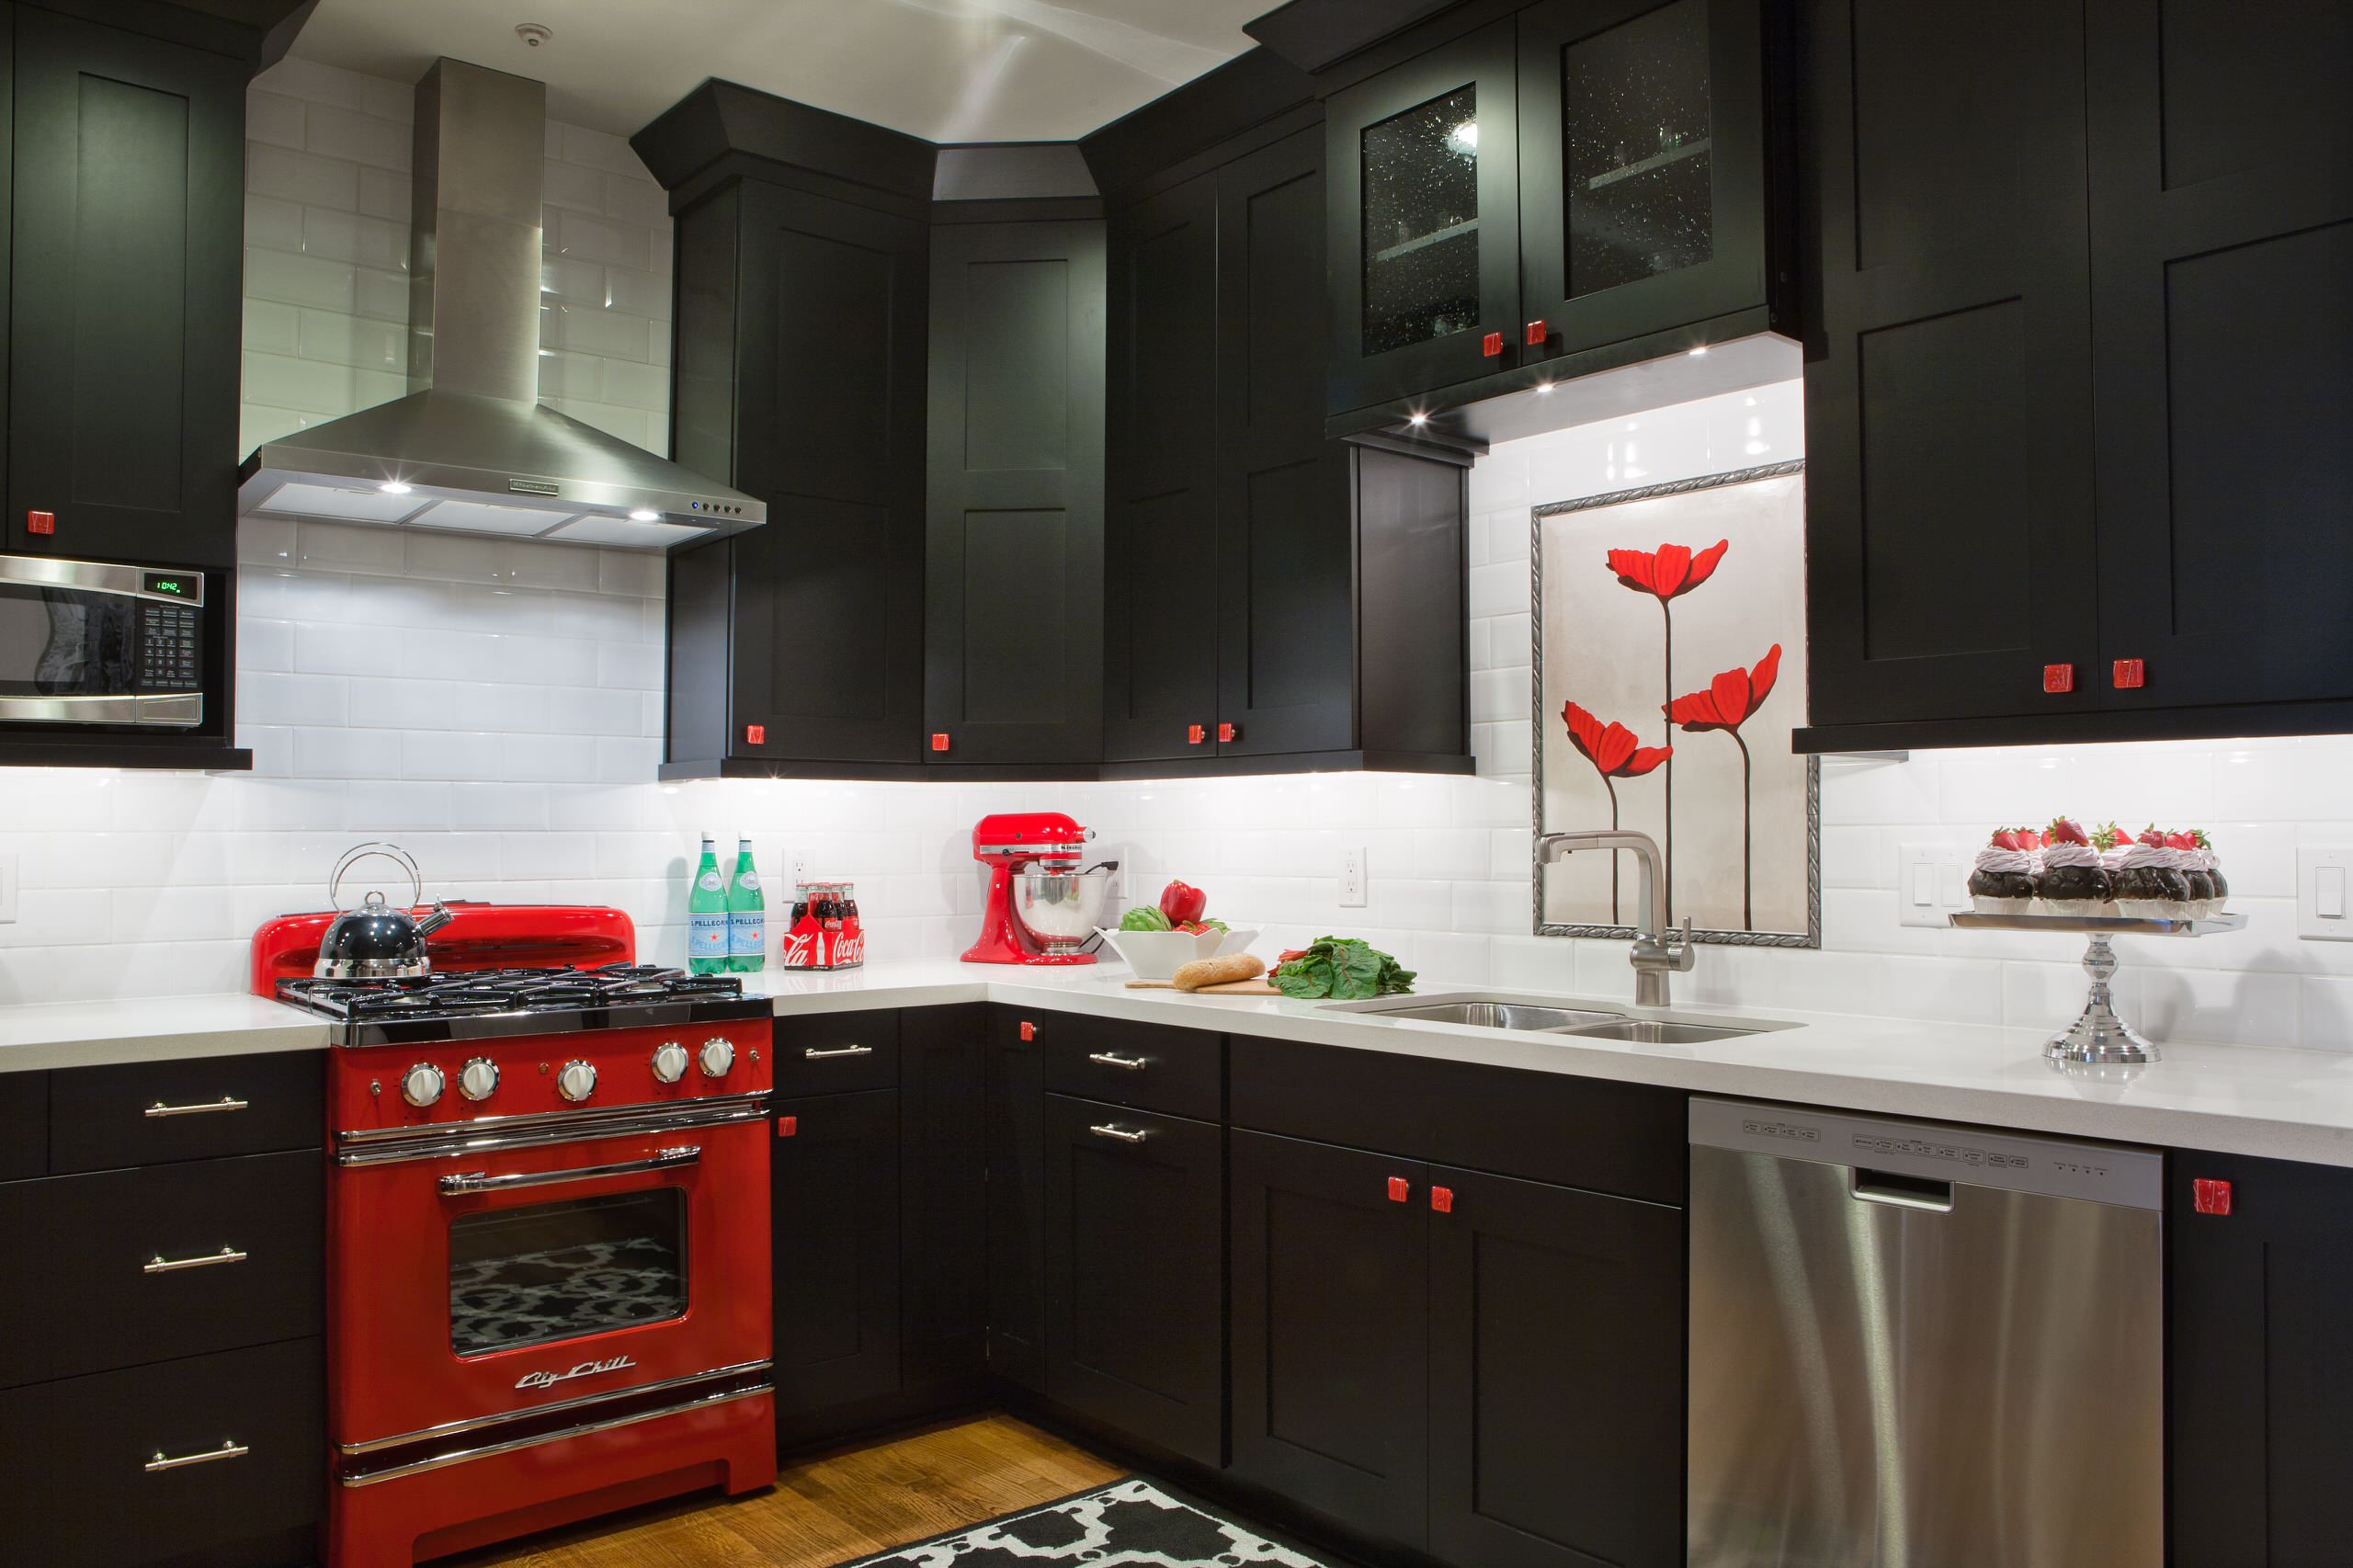 https://st.hzcdn.com/simgs/pictures/kitchens/black-white-and-red-kitchen-highland-design-gallery-img~1c91a4e6004b9de3_14-5626-1-005dfc9.jpg